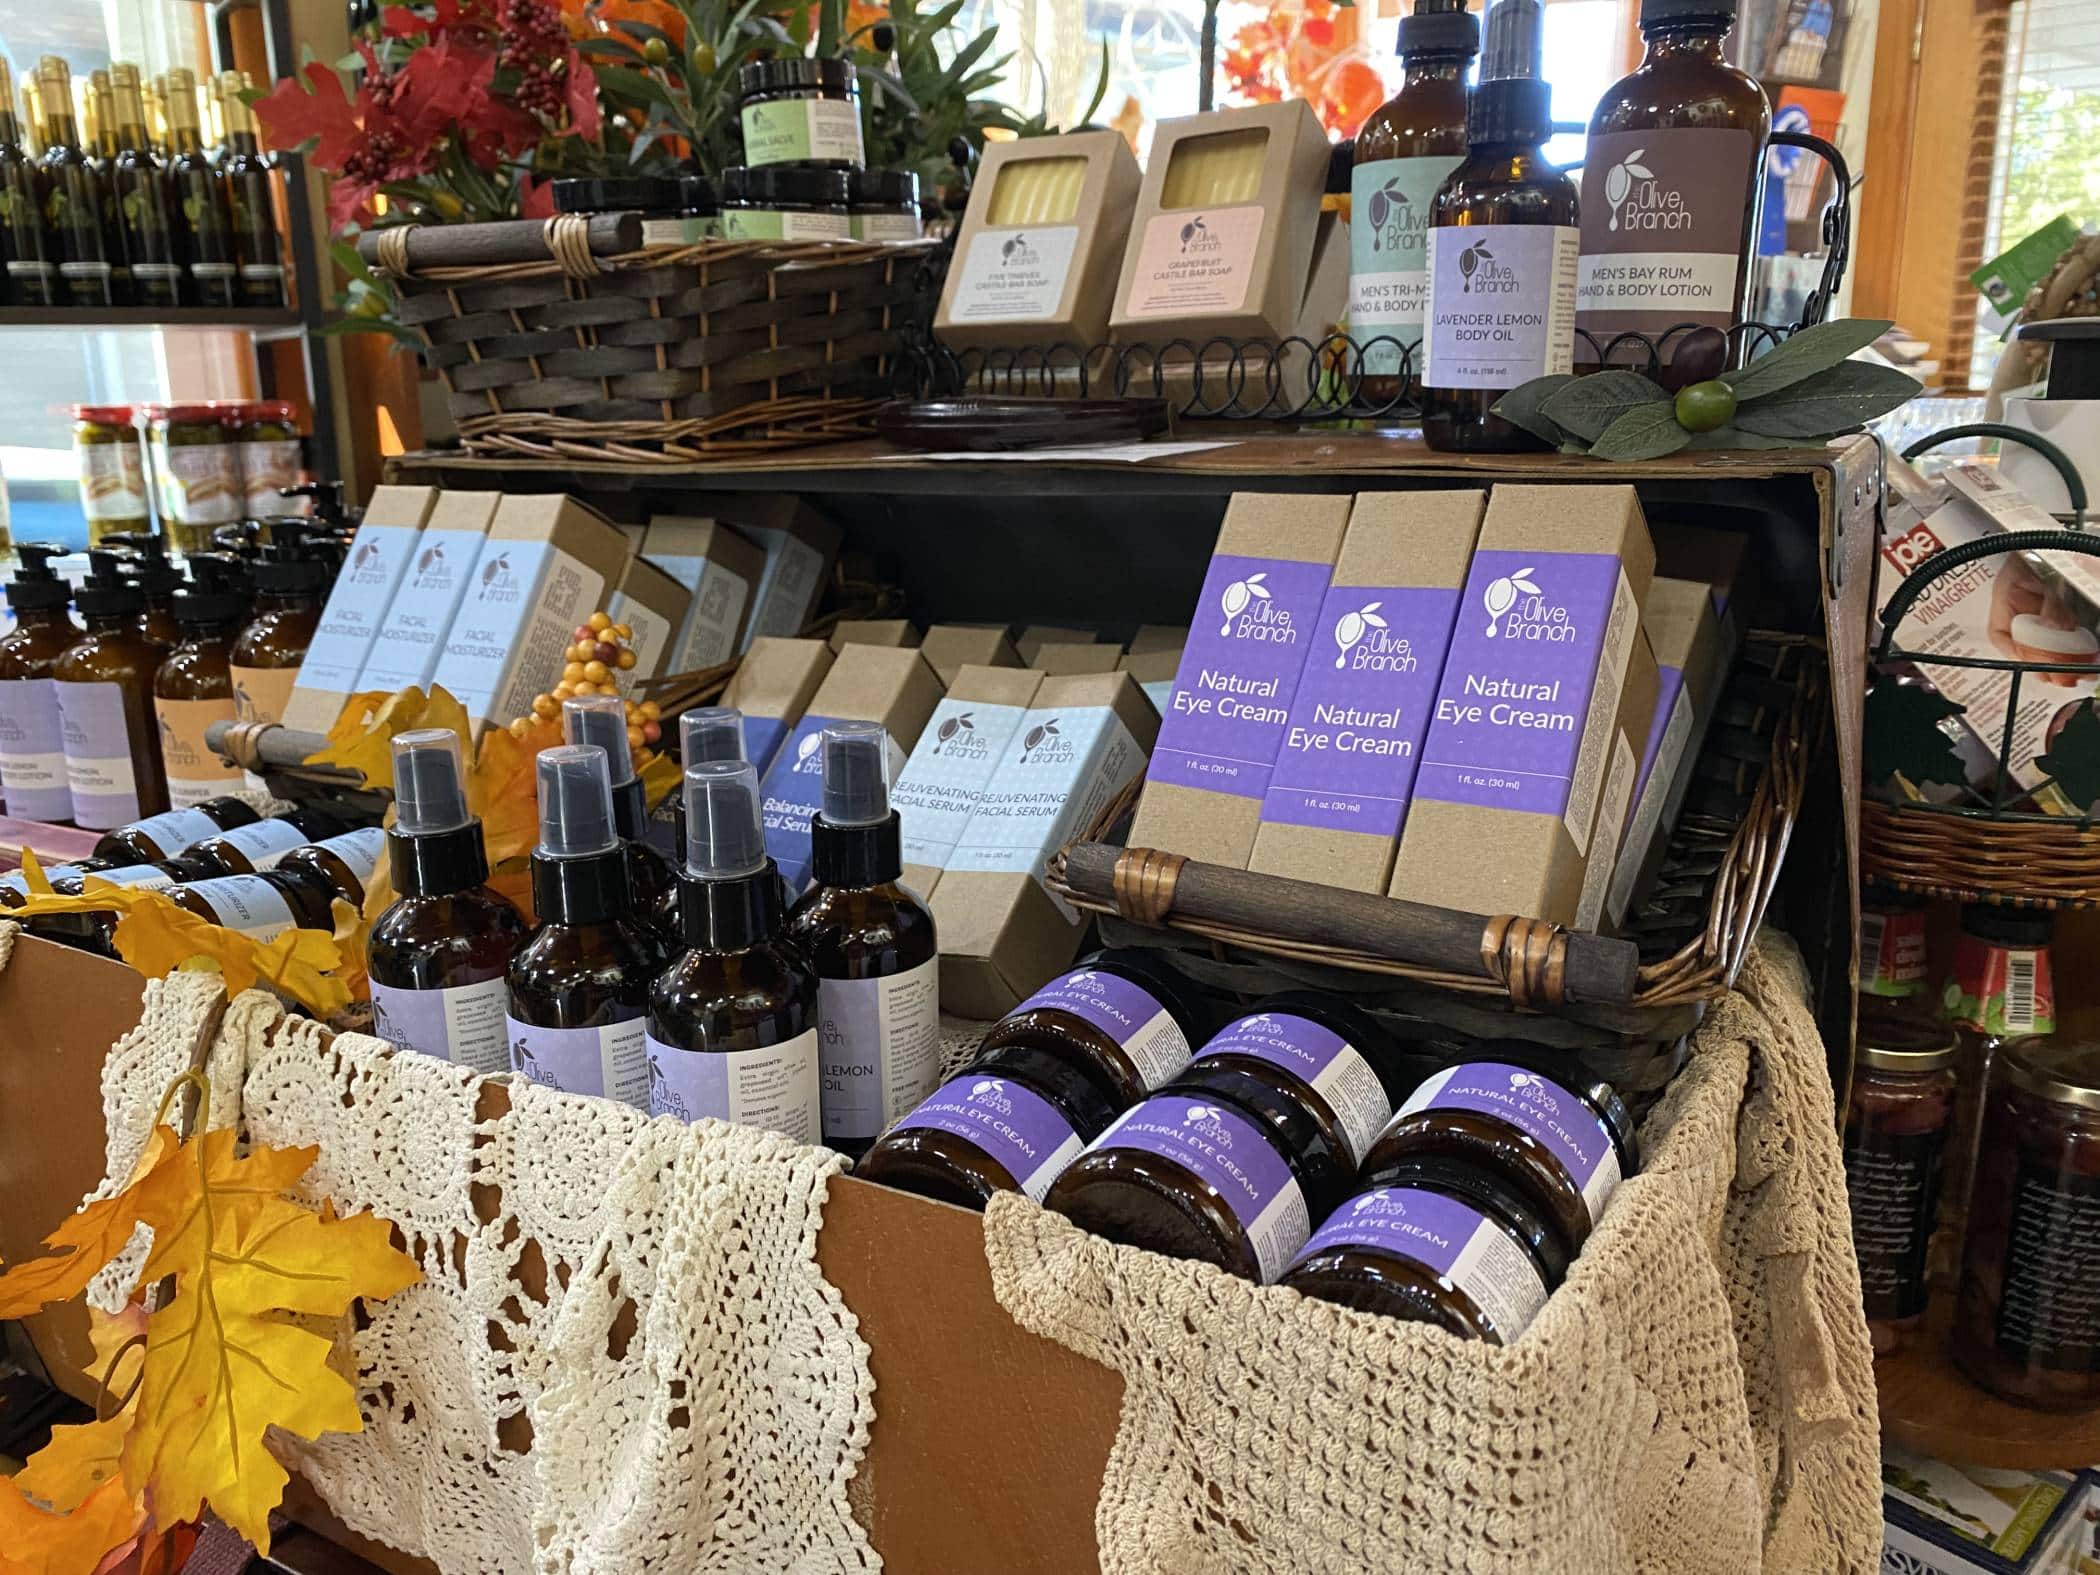 Display of a variety of olive oil skincare items at The Olive Branch in Winona Lake, IN